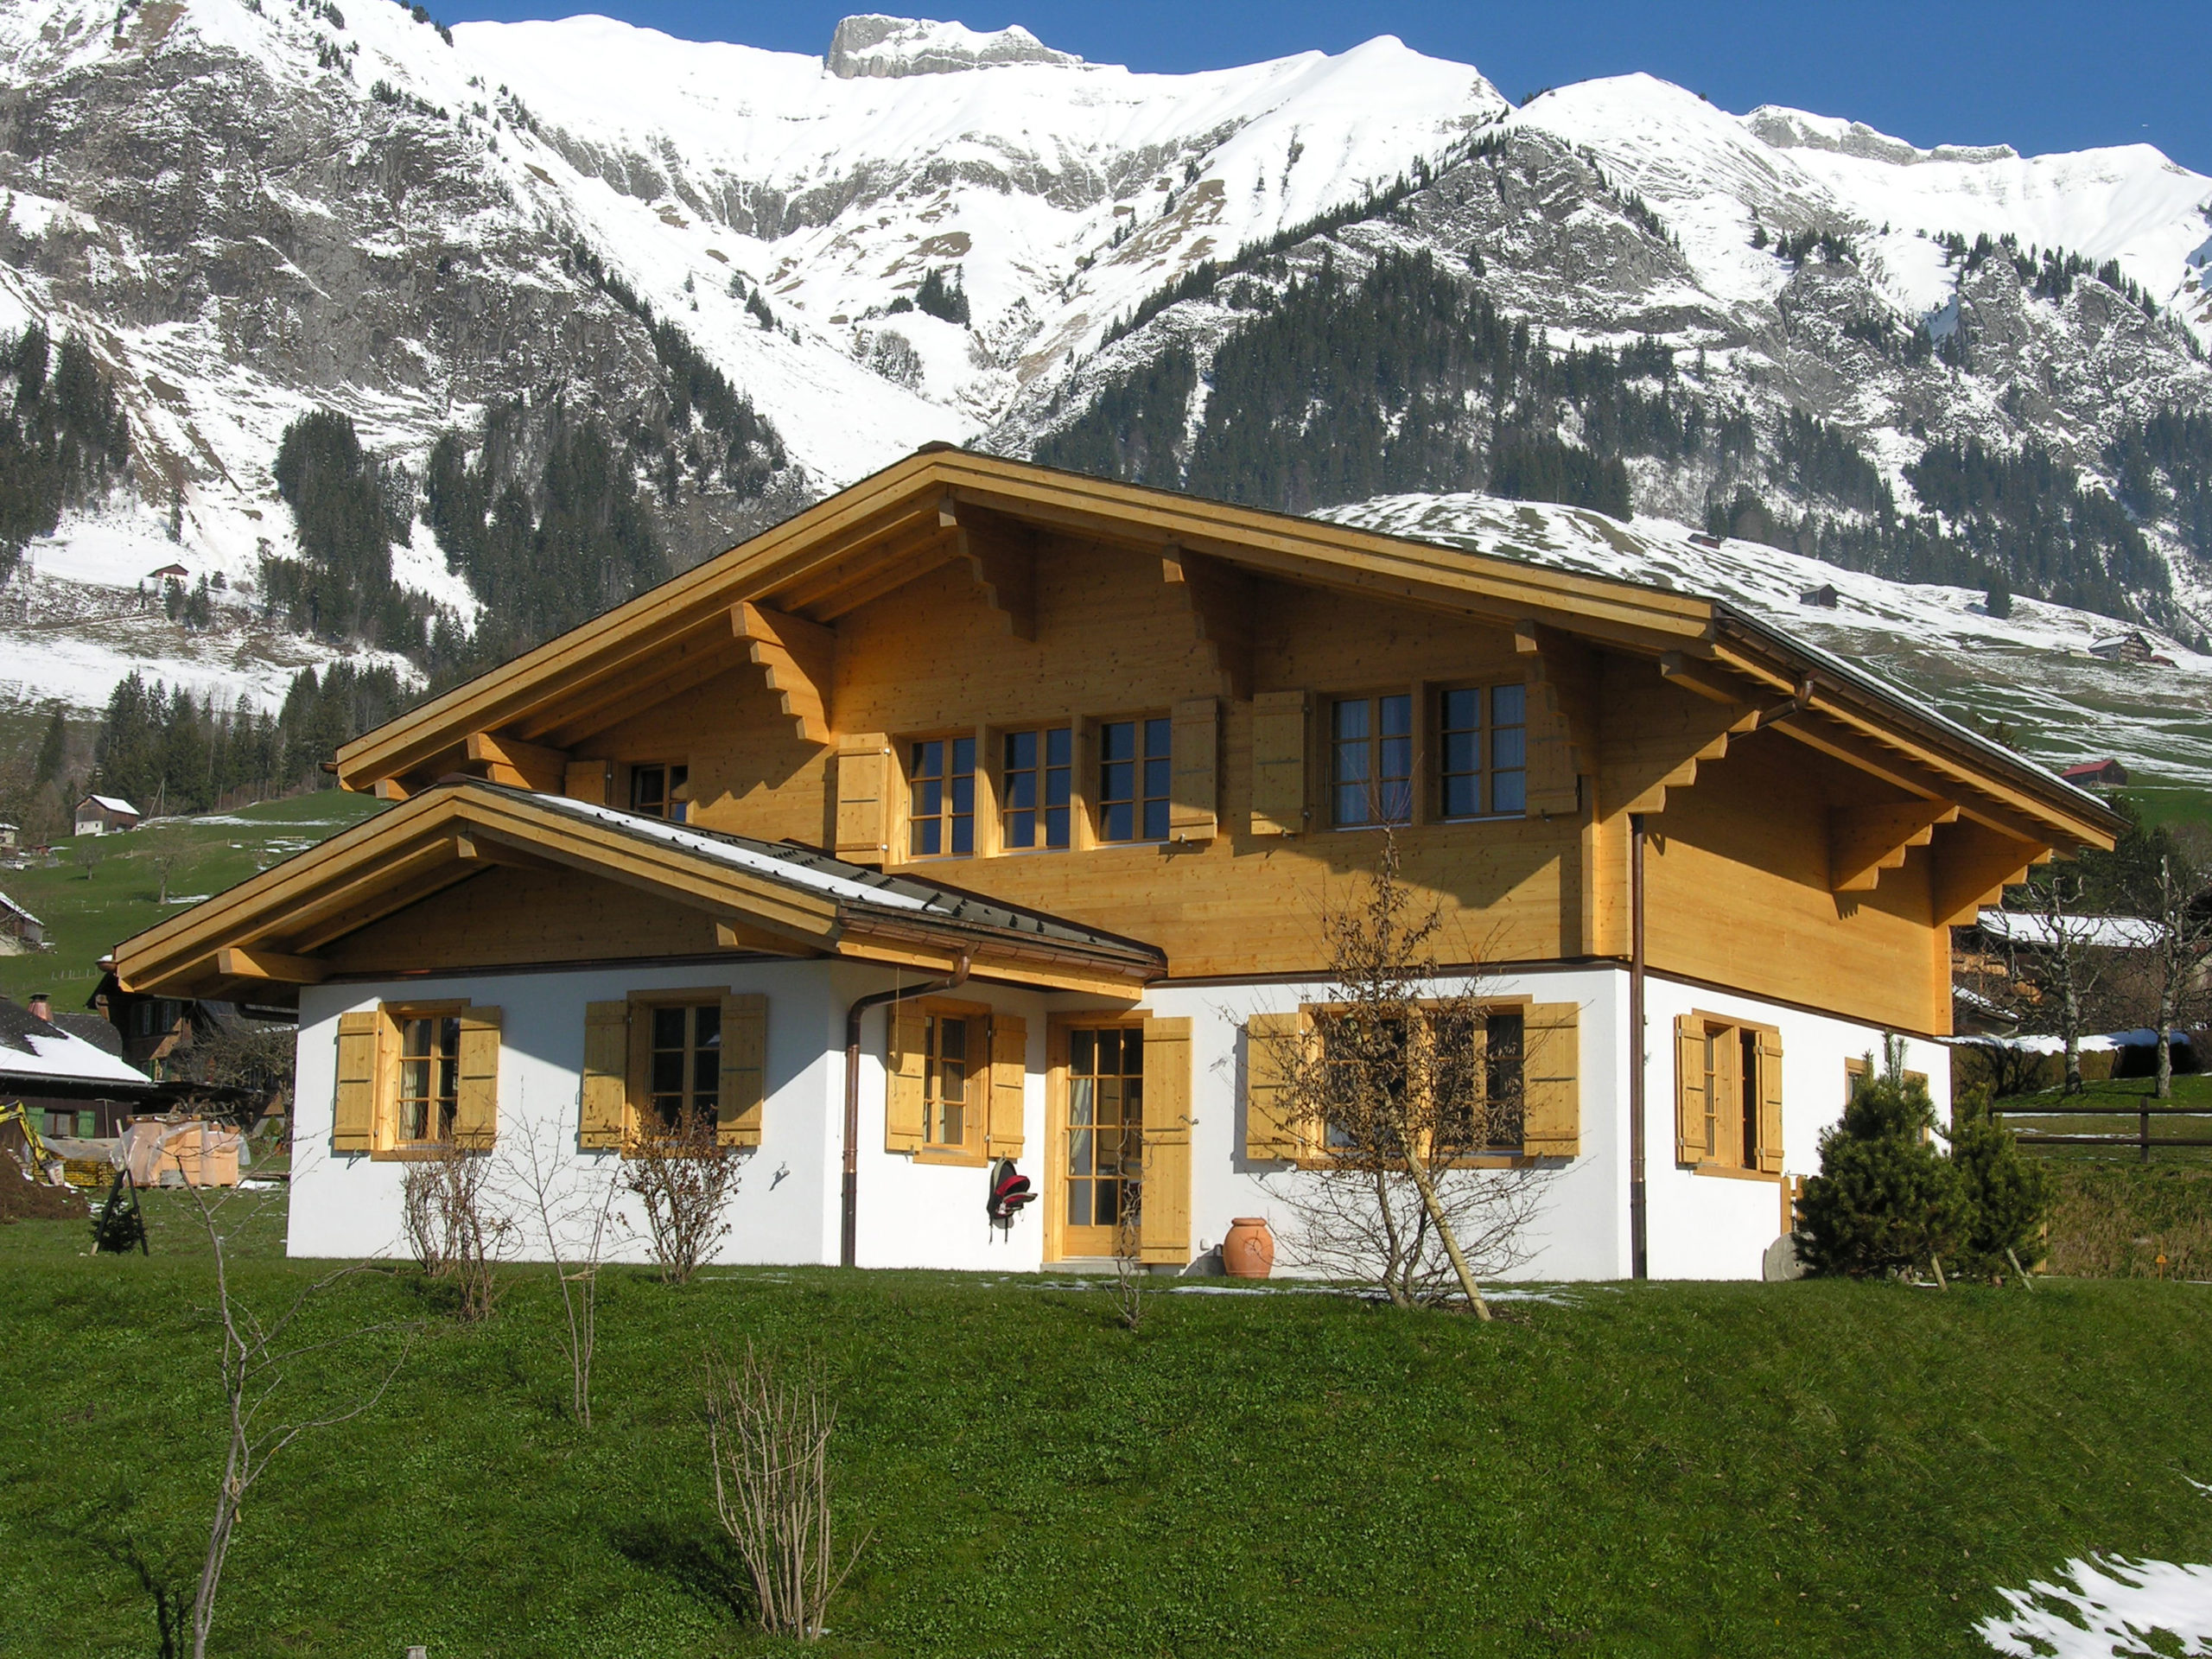 Chalet_Chateau-d-Oex_1